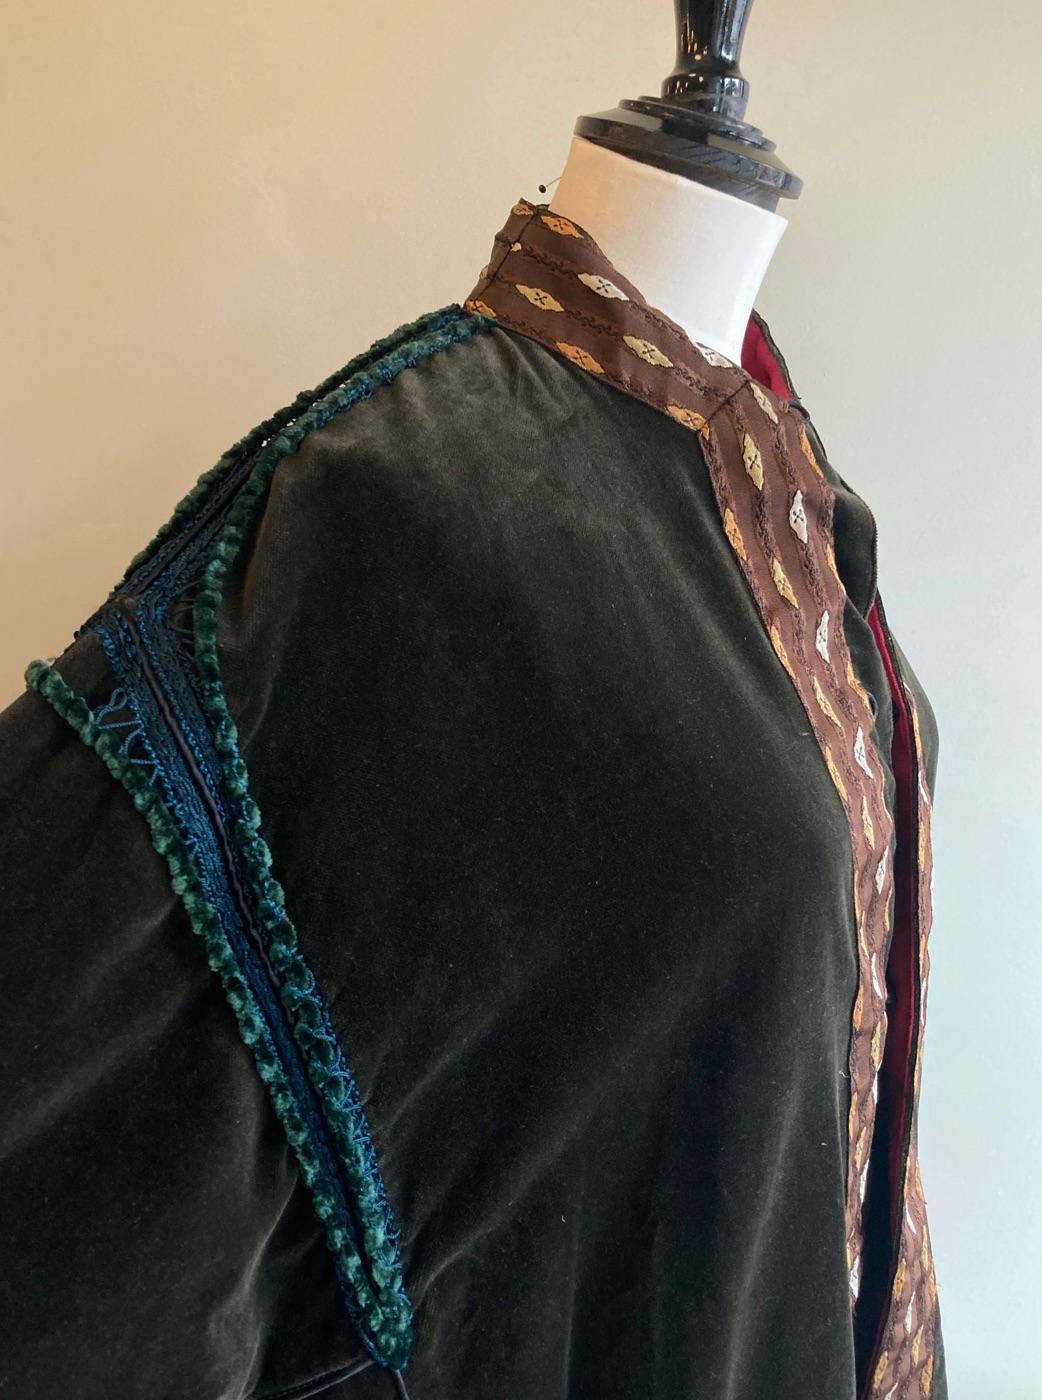 Vintage olive green velvet jacket from Voyage London by Louise and Tiziano Mazelli. 

Beautiful velvet jacket with brown, white and gold silk trim around the hemline, cuffs, collar and opening. Embellished with green and teal stitching along the